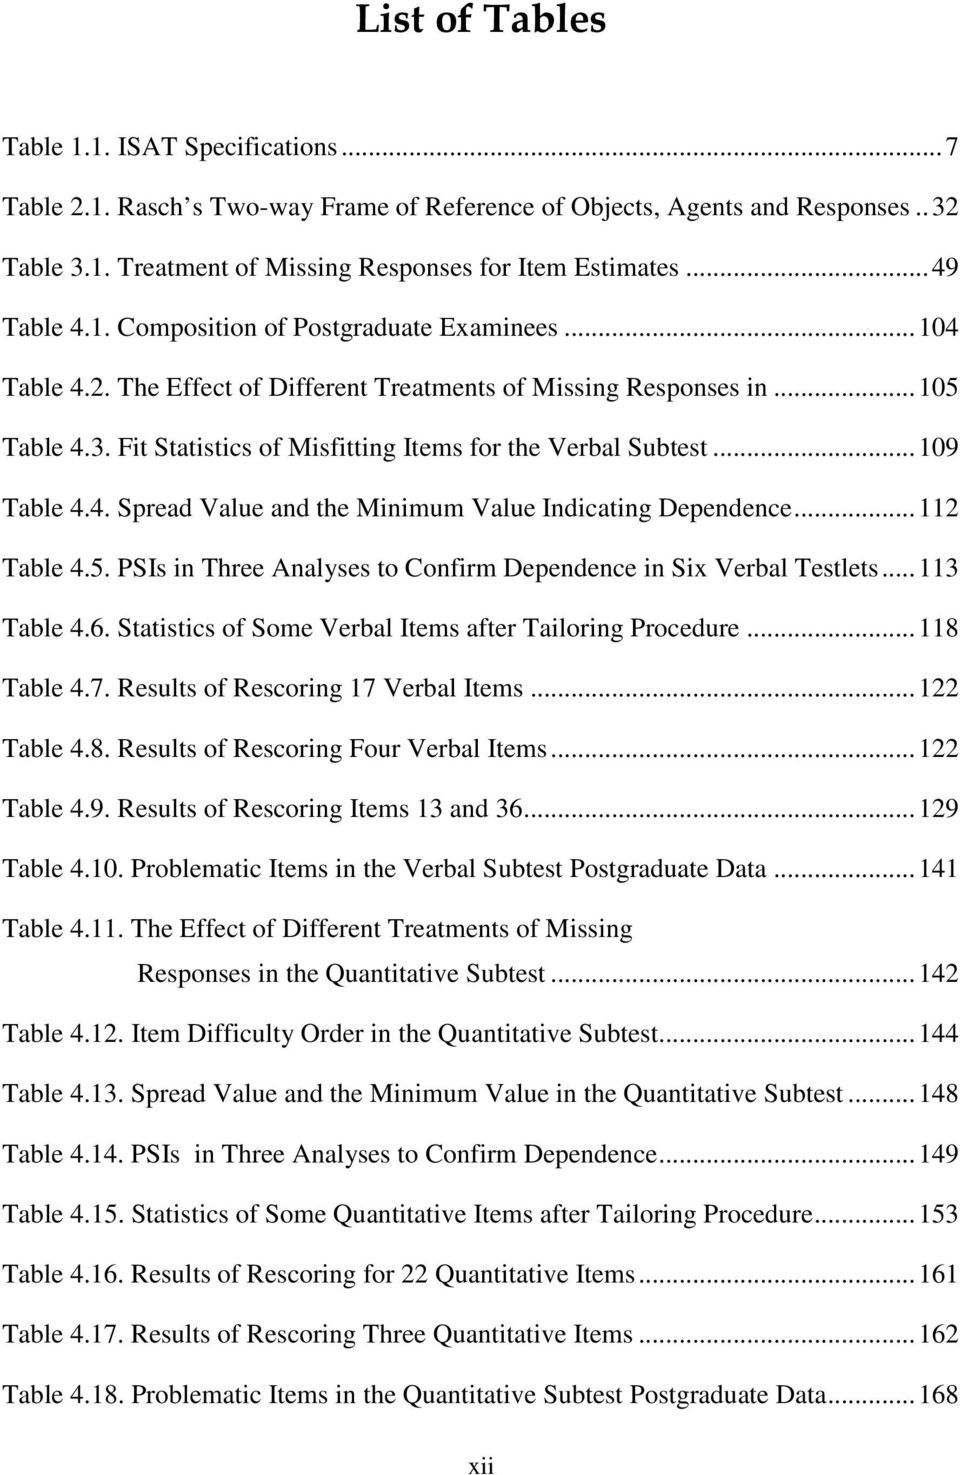 Fit Statistics of Misfitting Items for the Verbal Subtest... 109 Table 4.4. Spread Value and the Minimum Value Indicating Dependence... 112 Table 4.5.